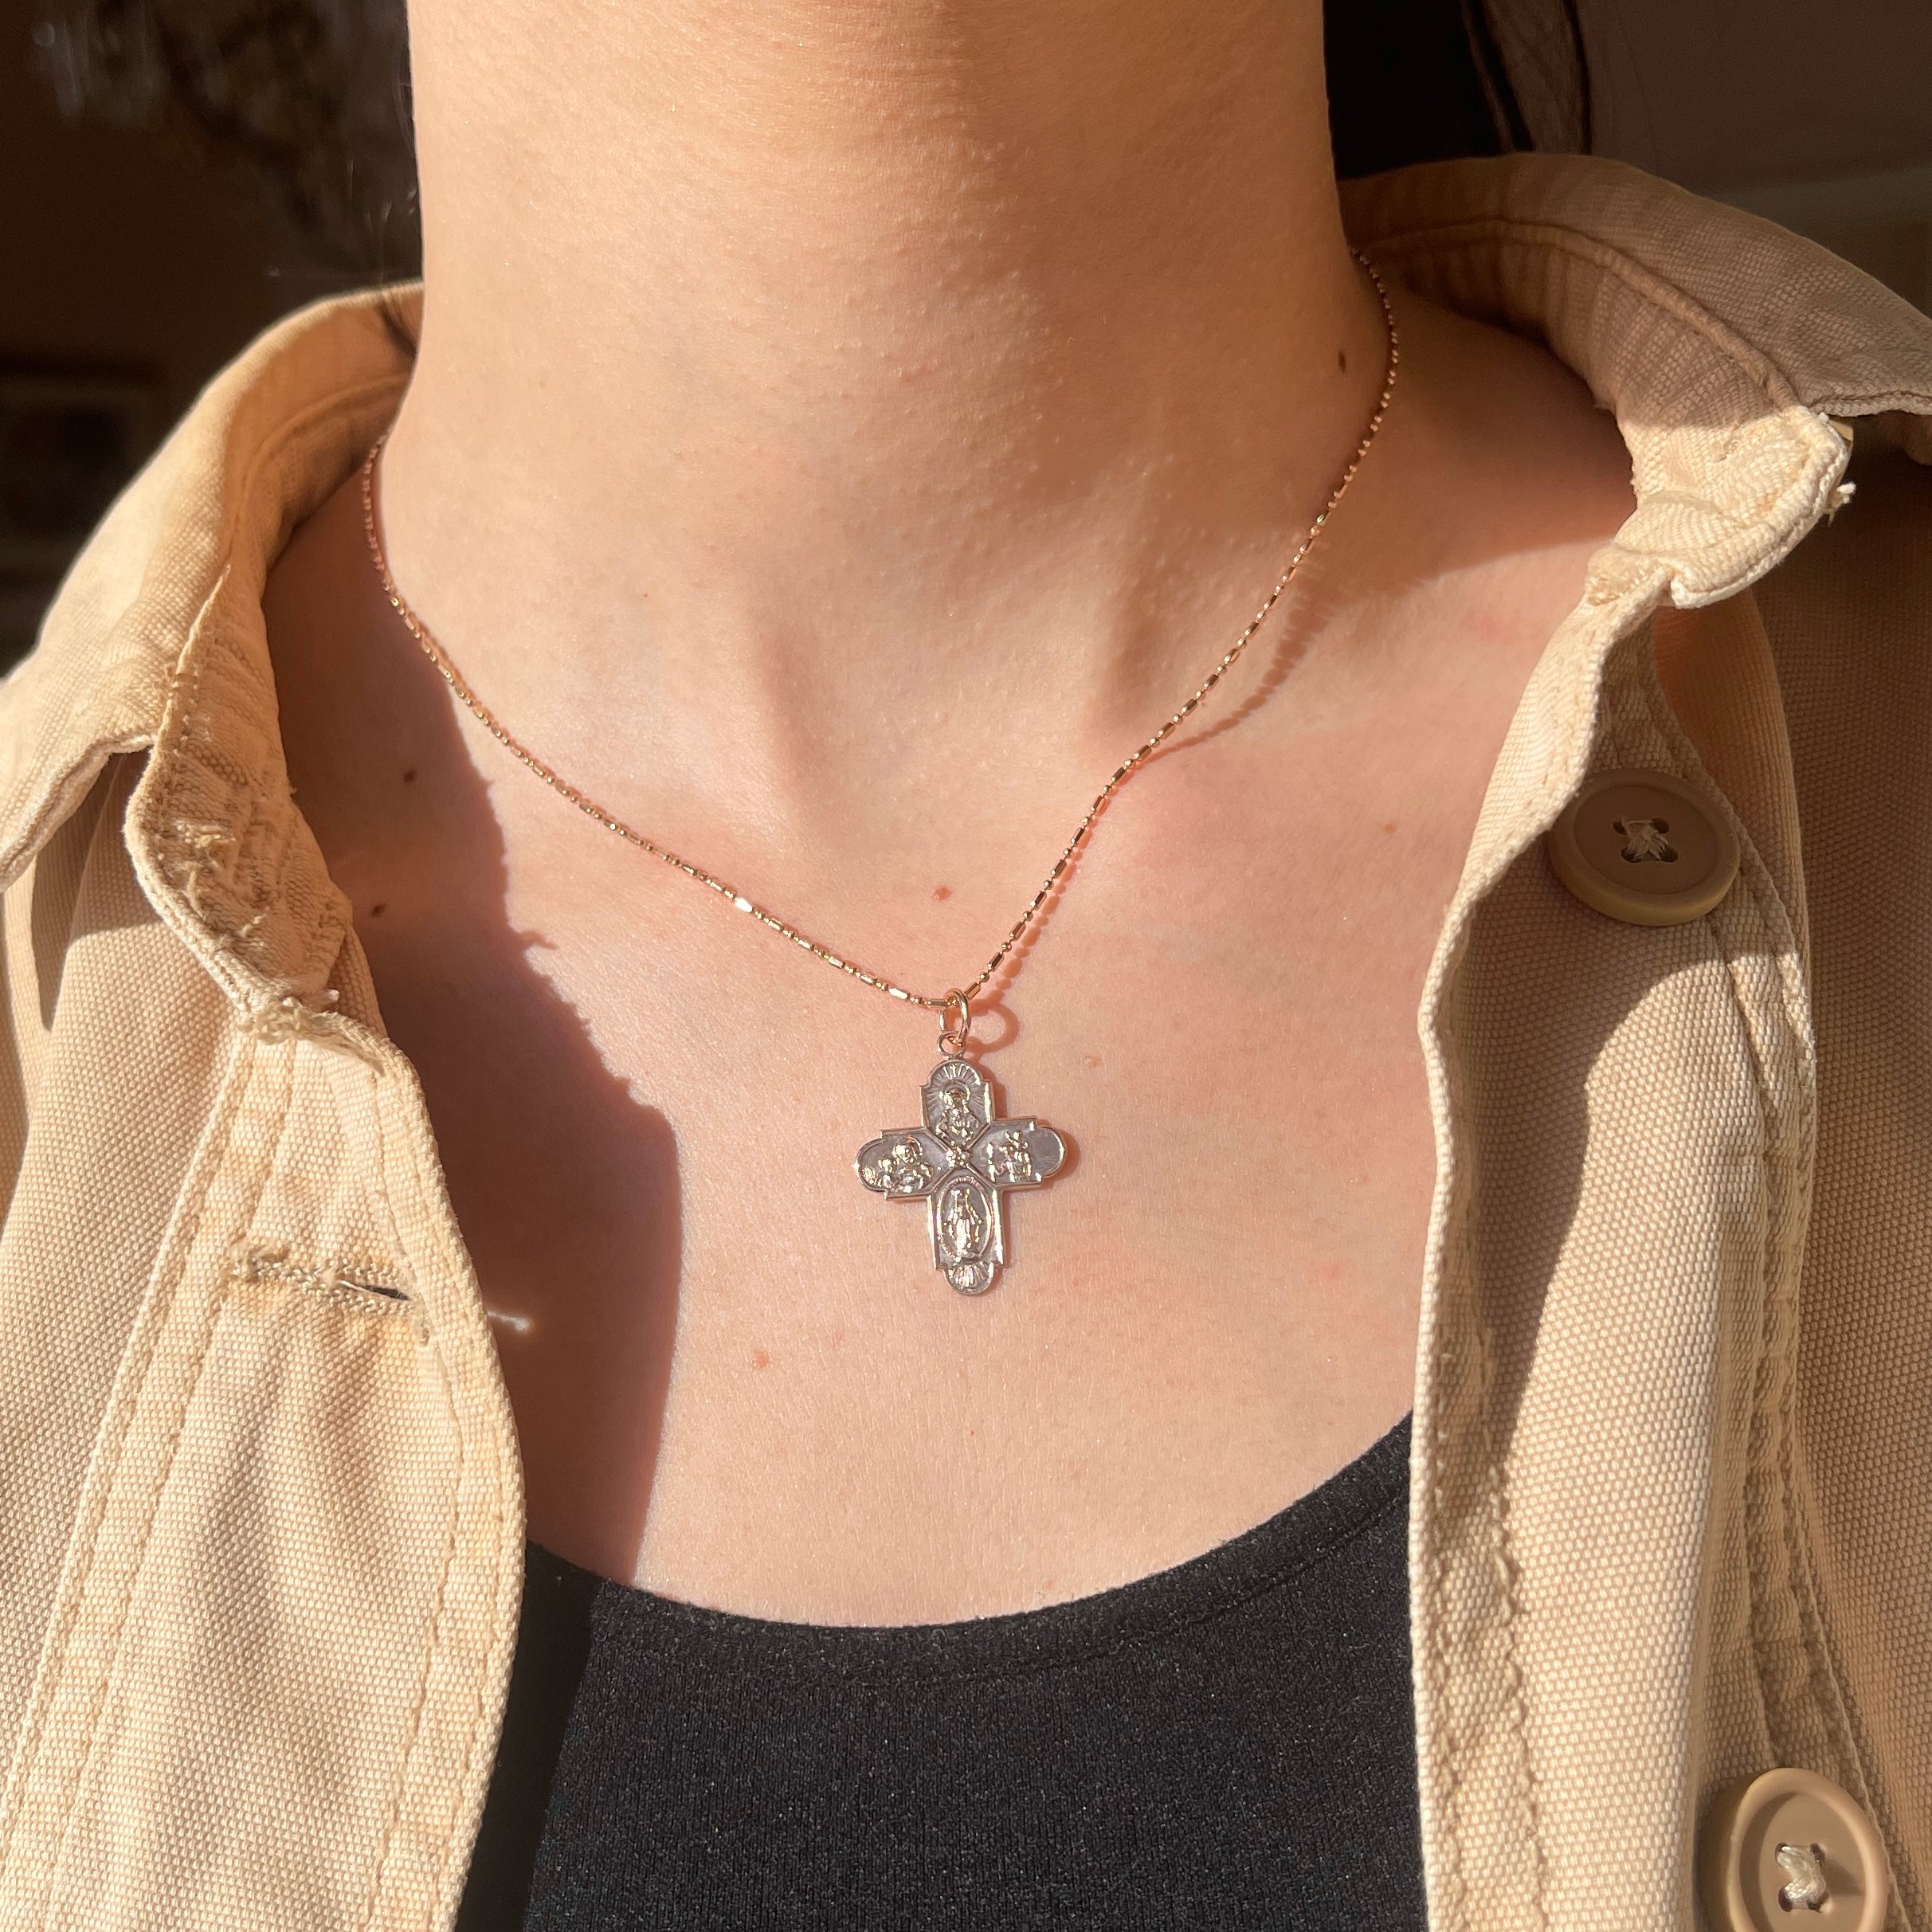 Hand Polished Sterling Silver 4-Way Cross Medal Pendant Necklace, 1.1 Inch  | eBay